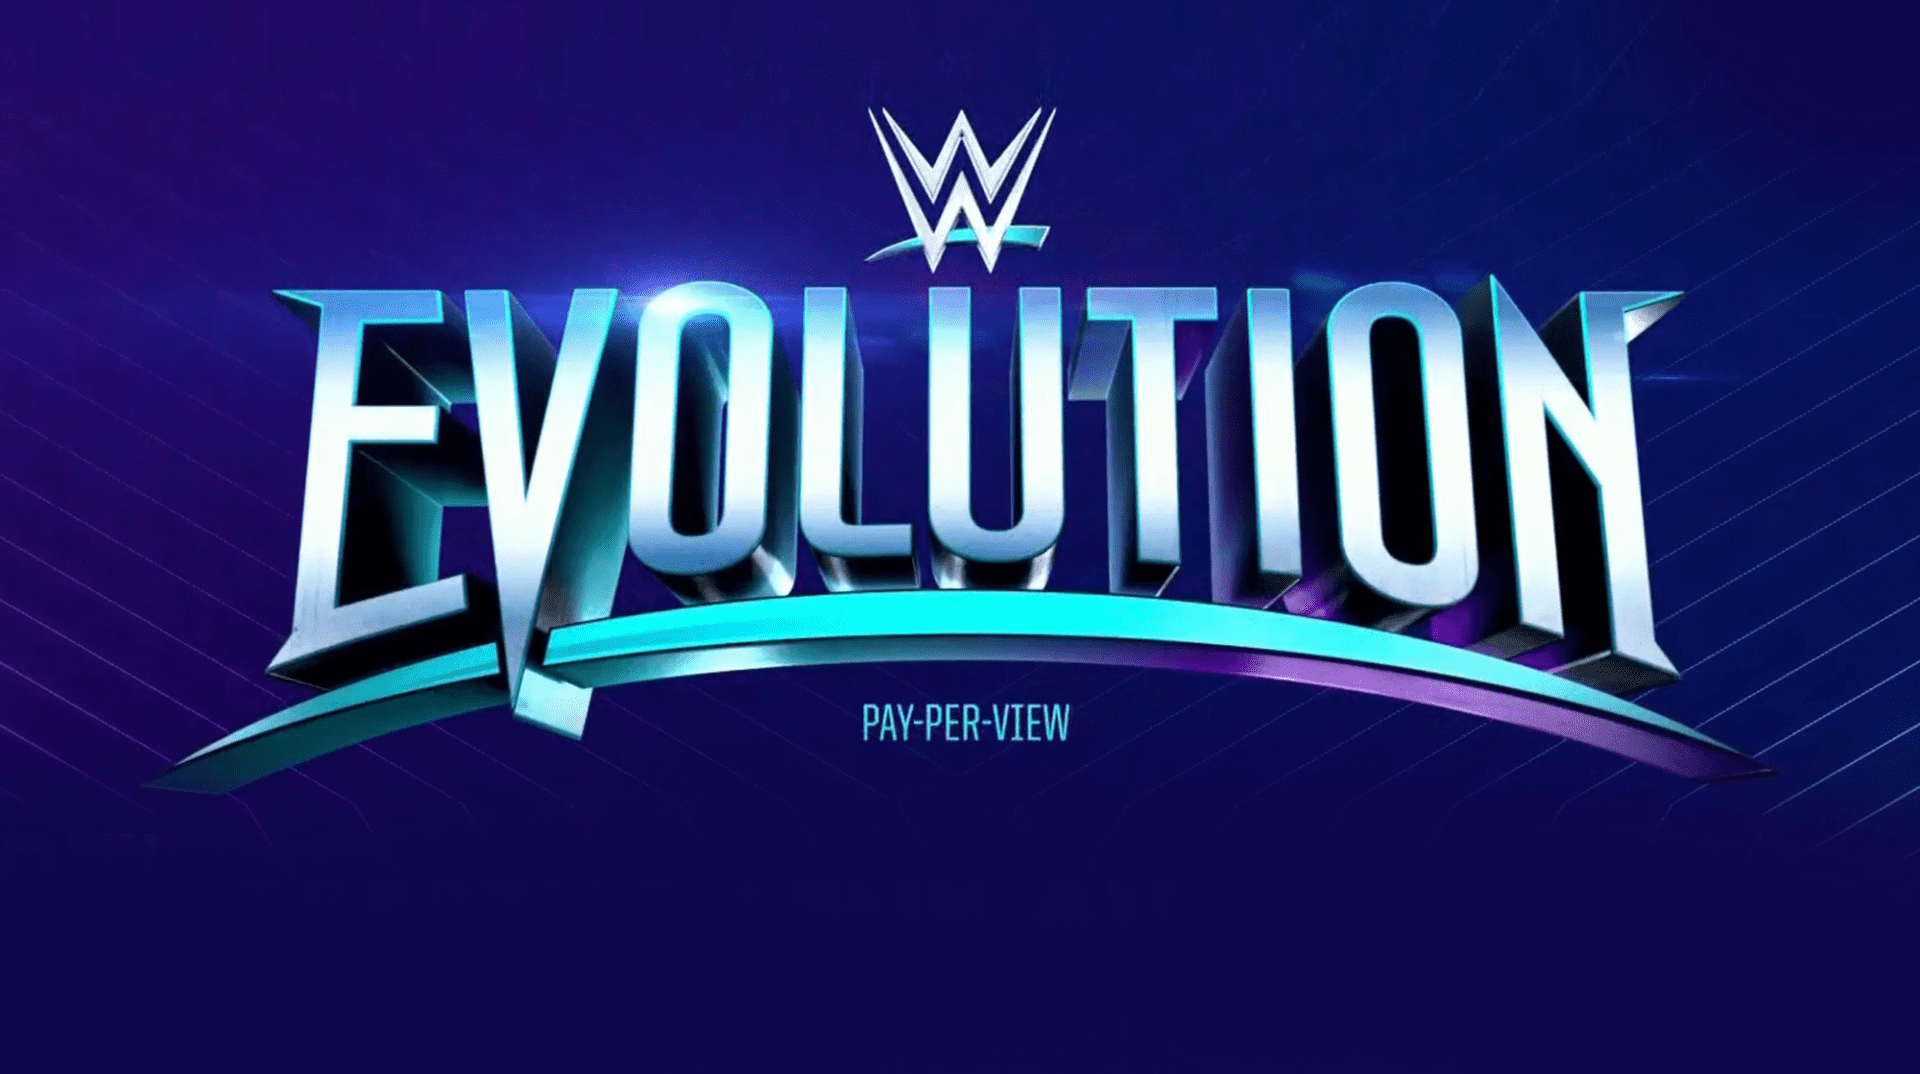 Wwe Evolution 18 Spoilers Torrie Wilson Returns As Seven Matches Announced So Far Mae Young Classic Nxt Nxt Uk Raw Smackdown Live Spoilers Update 3 Inside Pulse